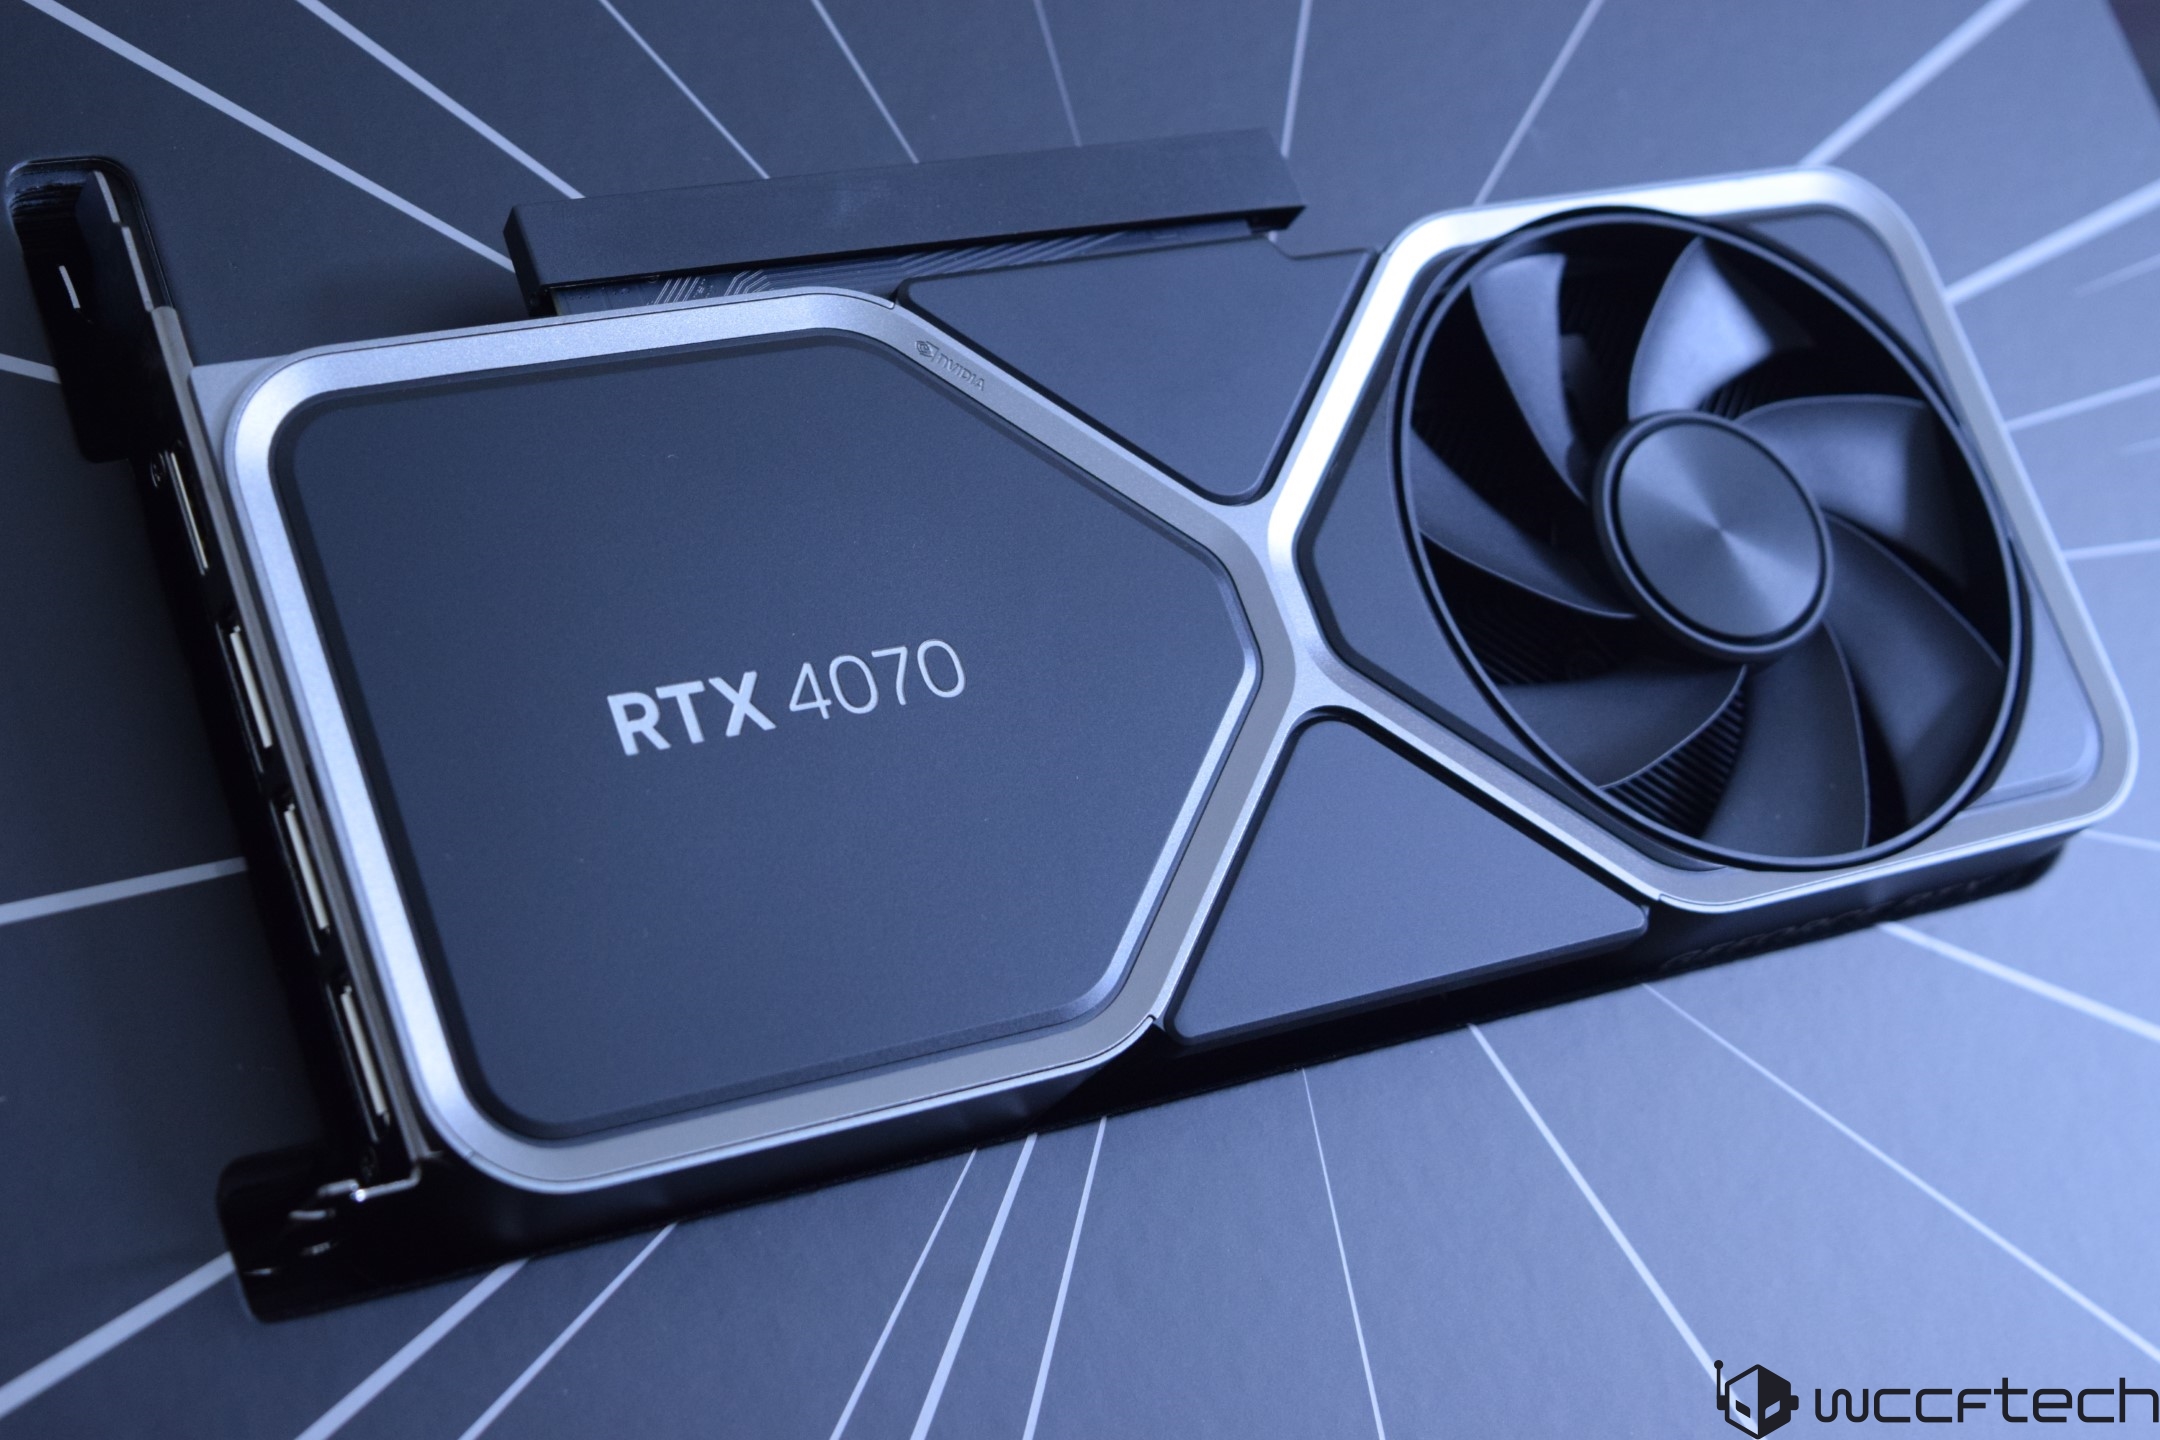 GeForce RTX 4070 graphics cards won’t be produced until June due to weak demand